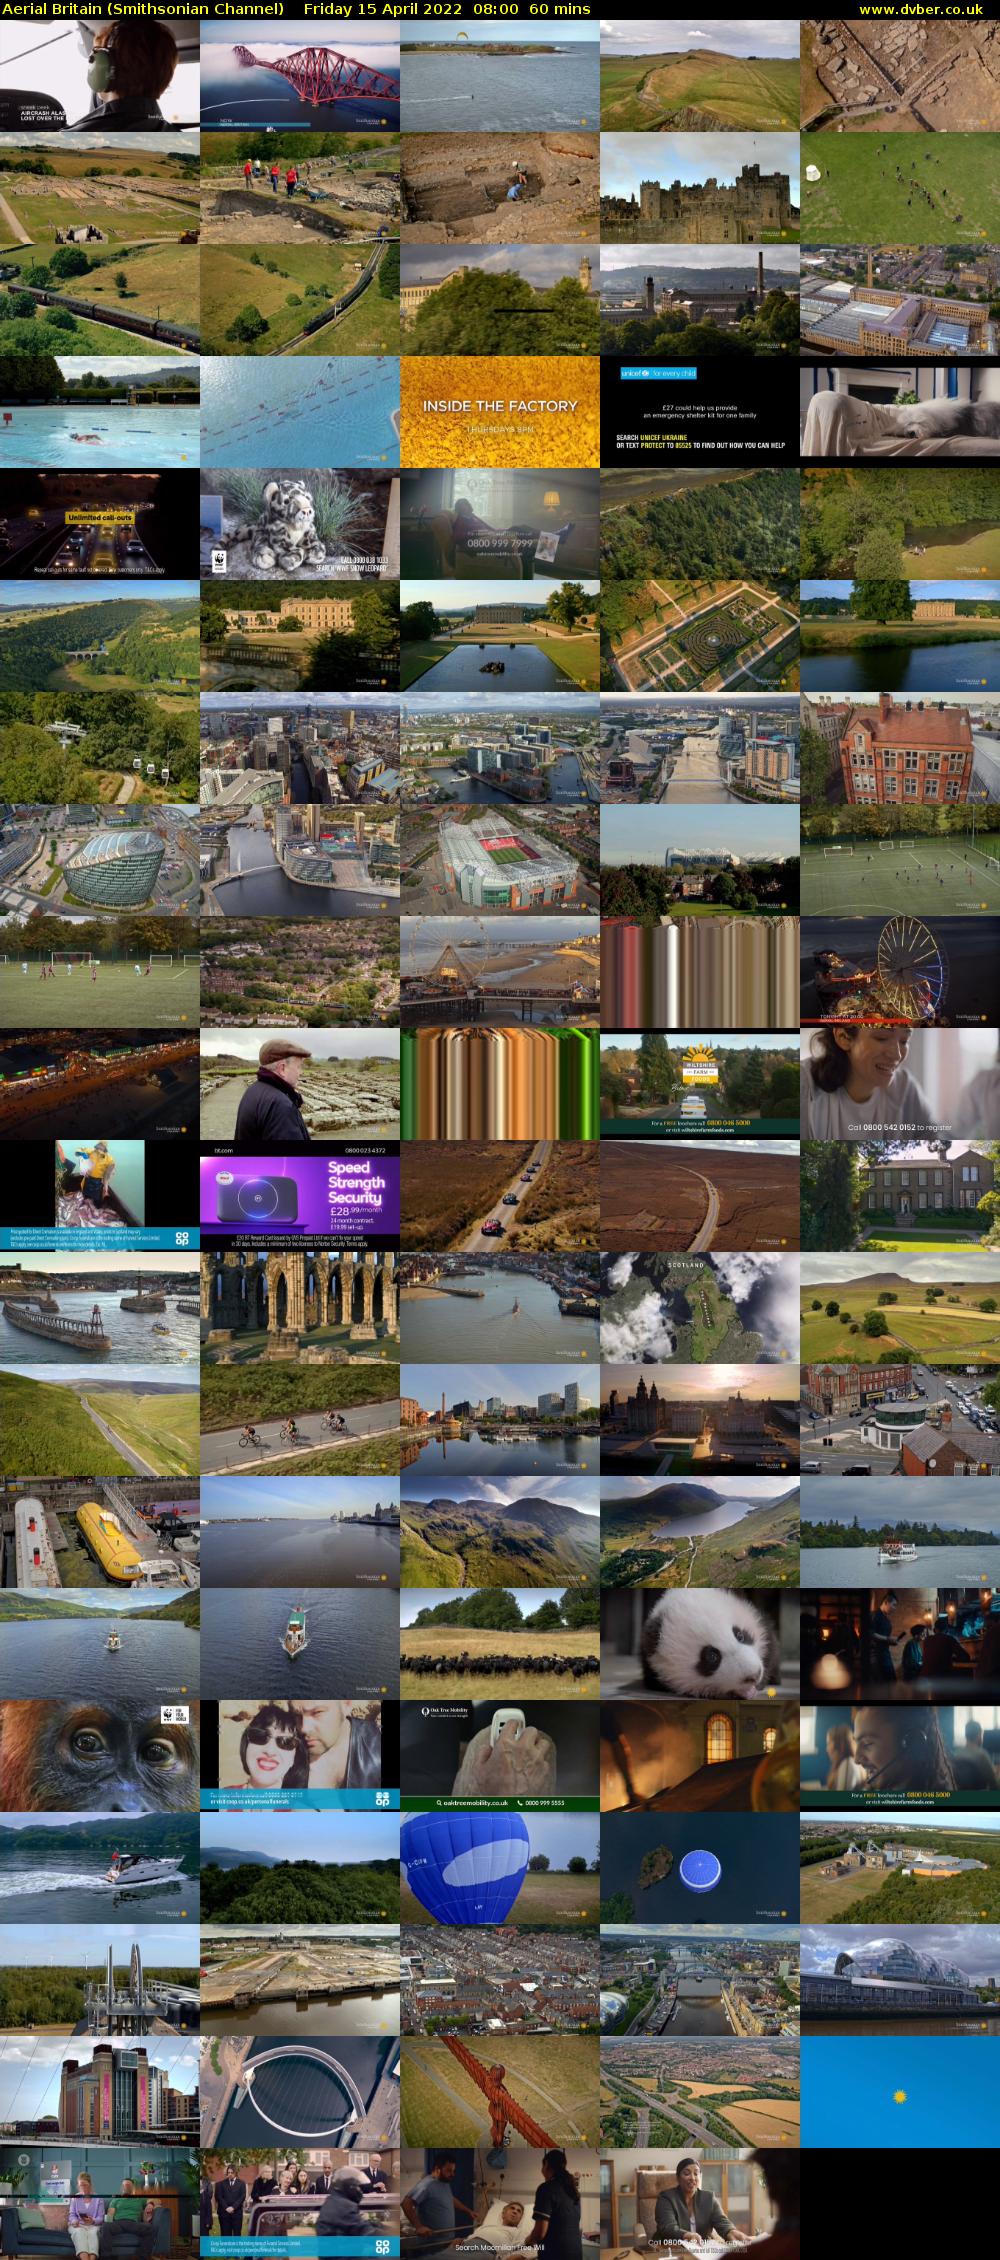 Aerial Britain (Smithsonian Channel) Friday 15 April 2022 08:00 - 09:00